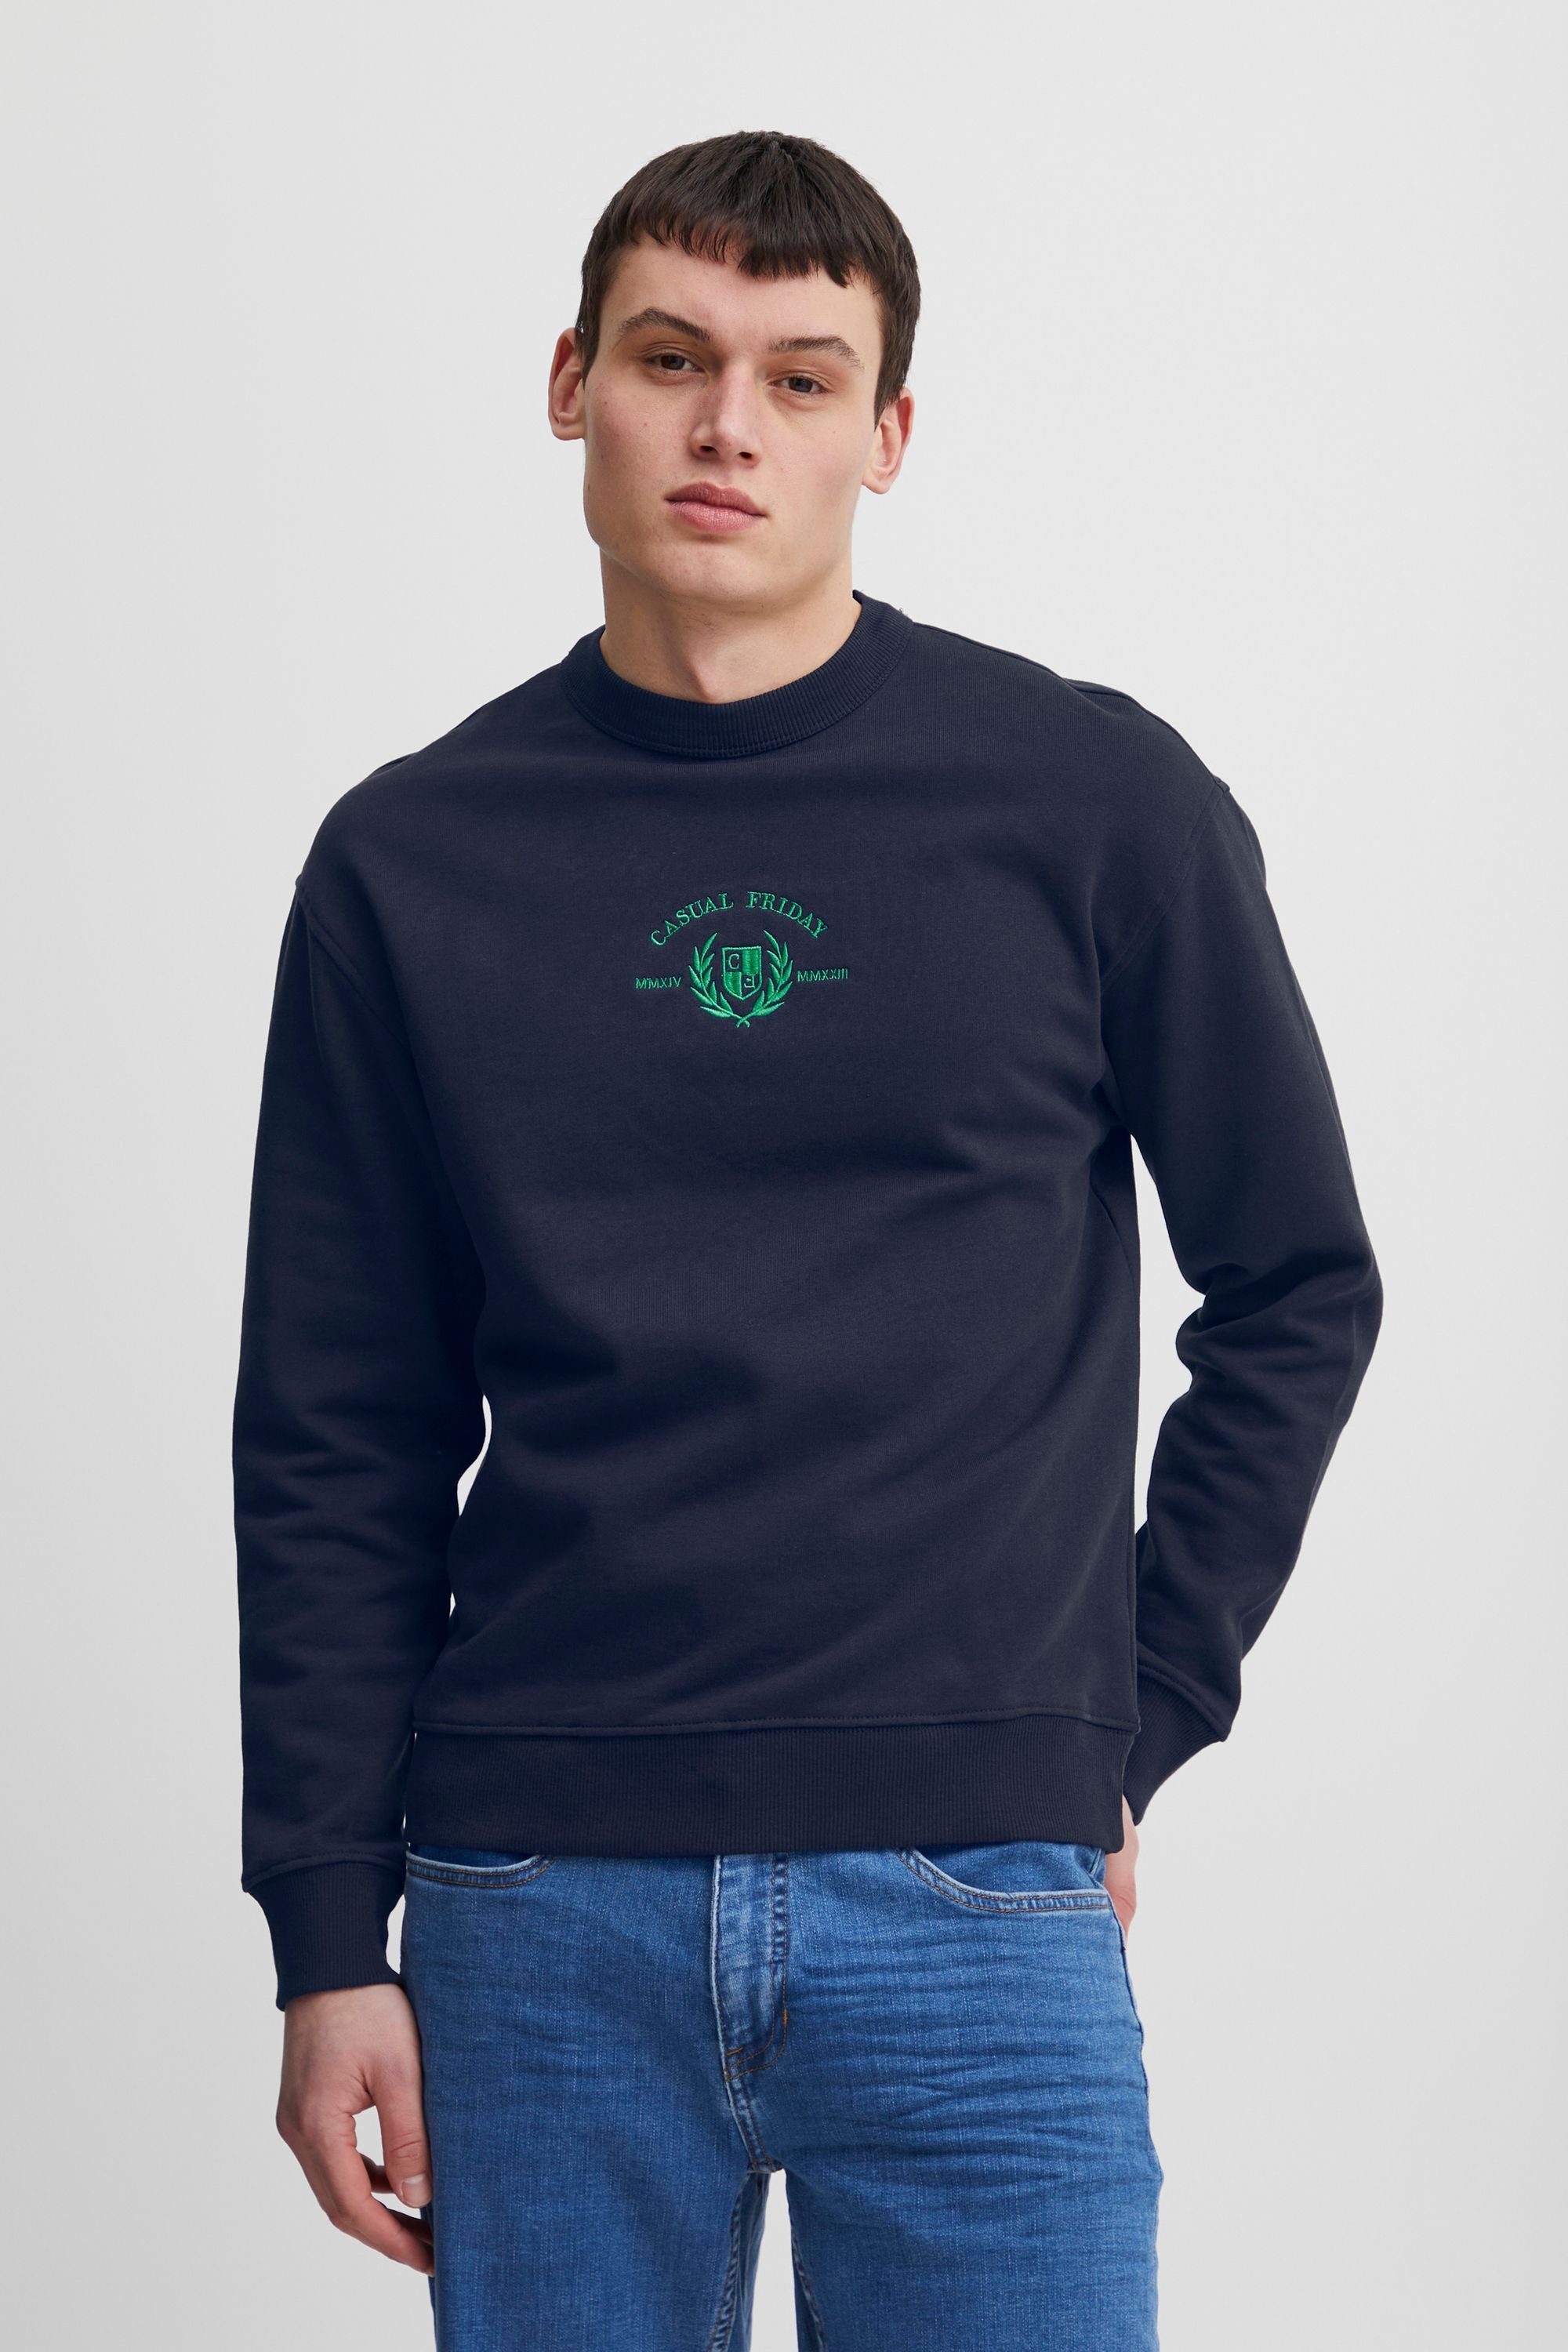 - Navy Casual Friday Dark 20504729 CFSage embroidery w. Sweatshirt sweat relaxed (194013)